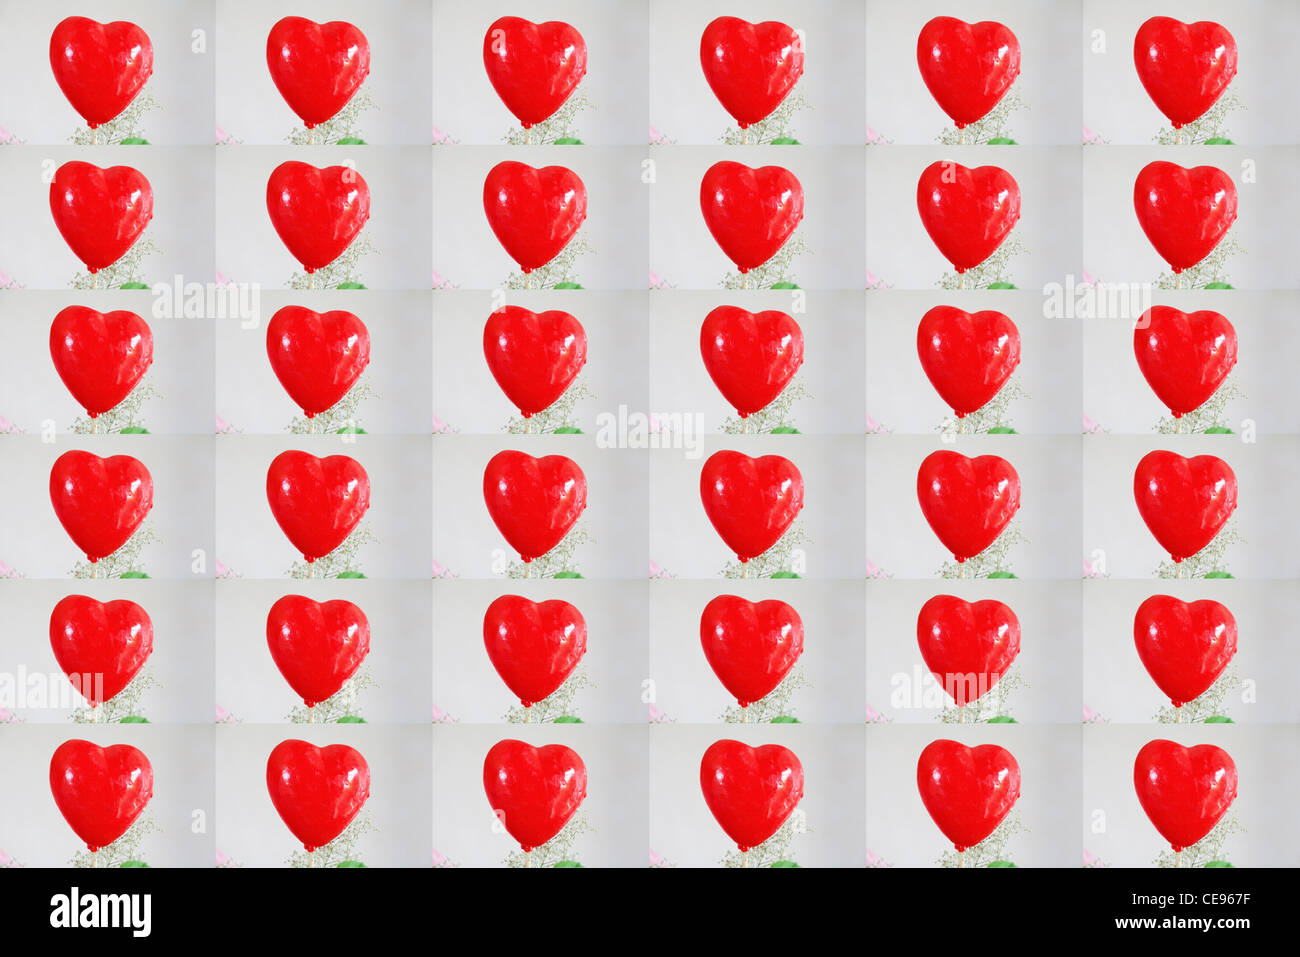 Red hearts. Stock Photo